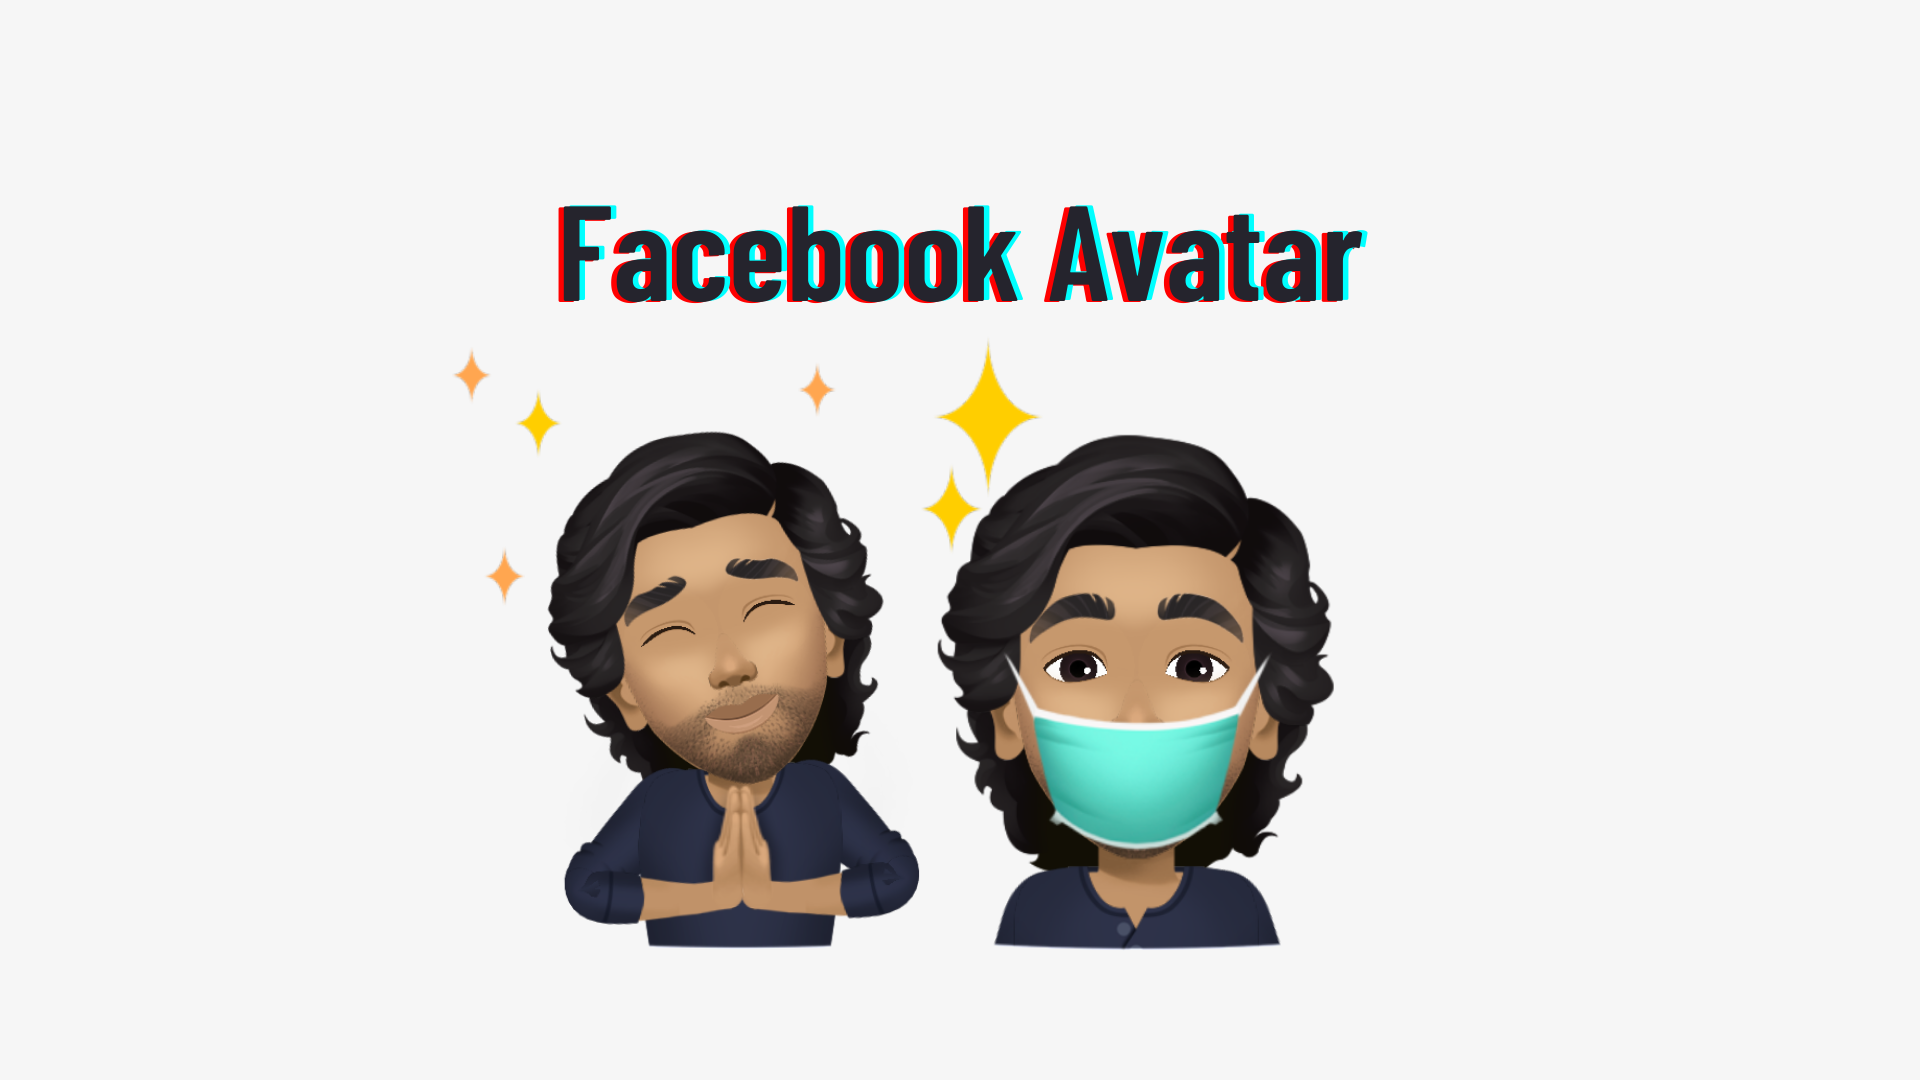 Steps to create your Avatar on Facebook